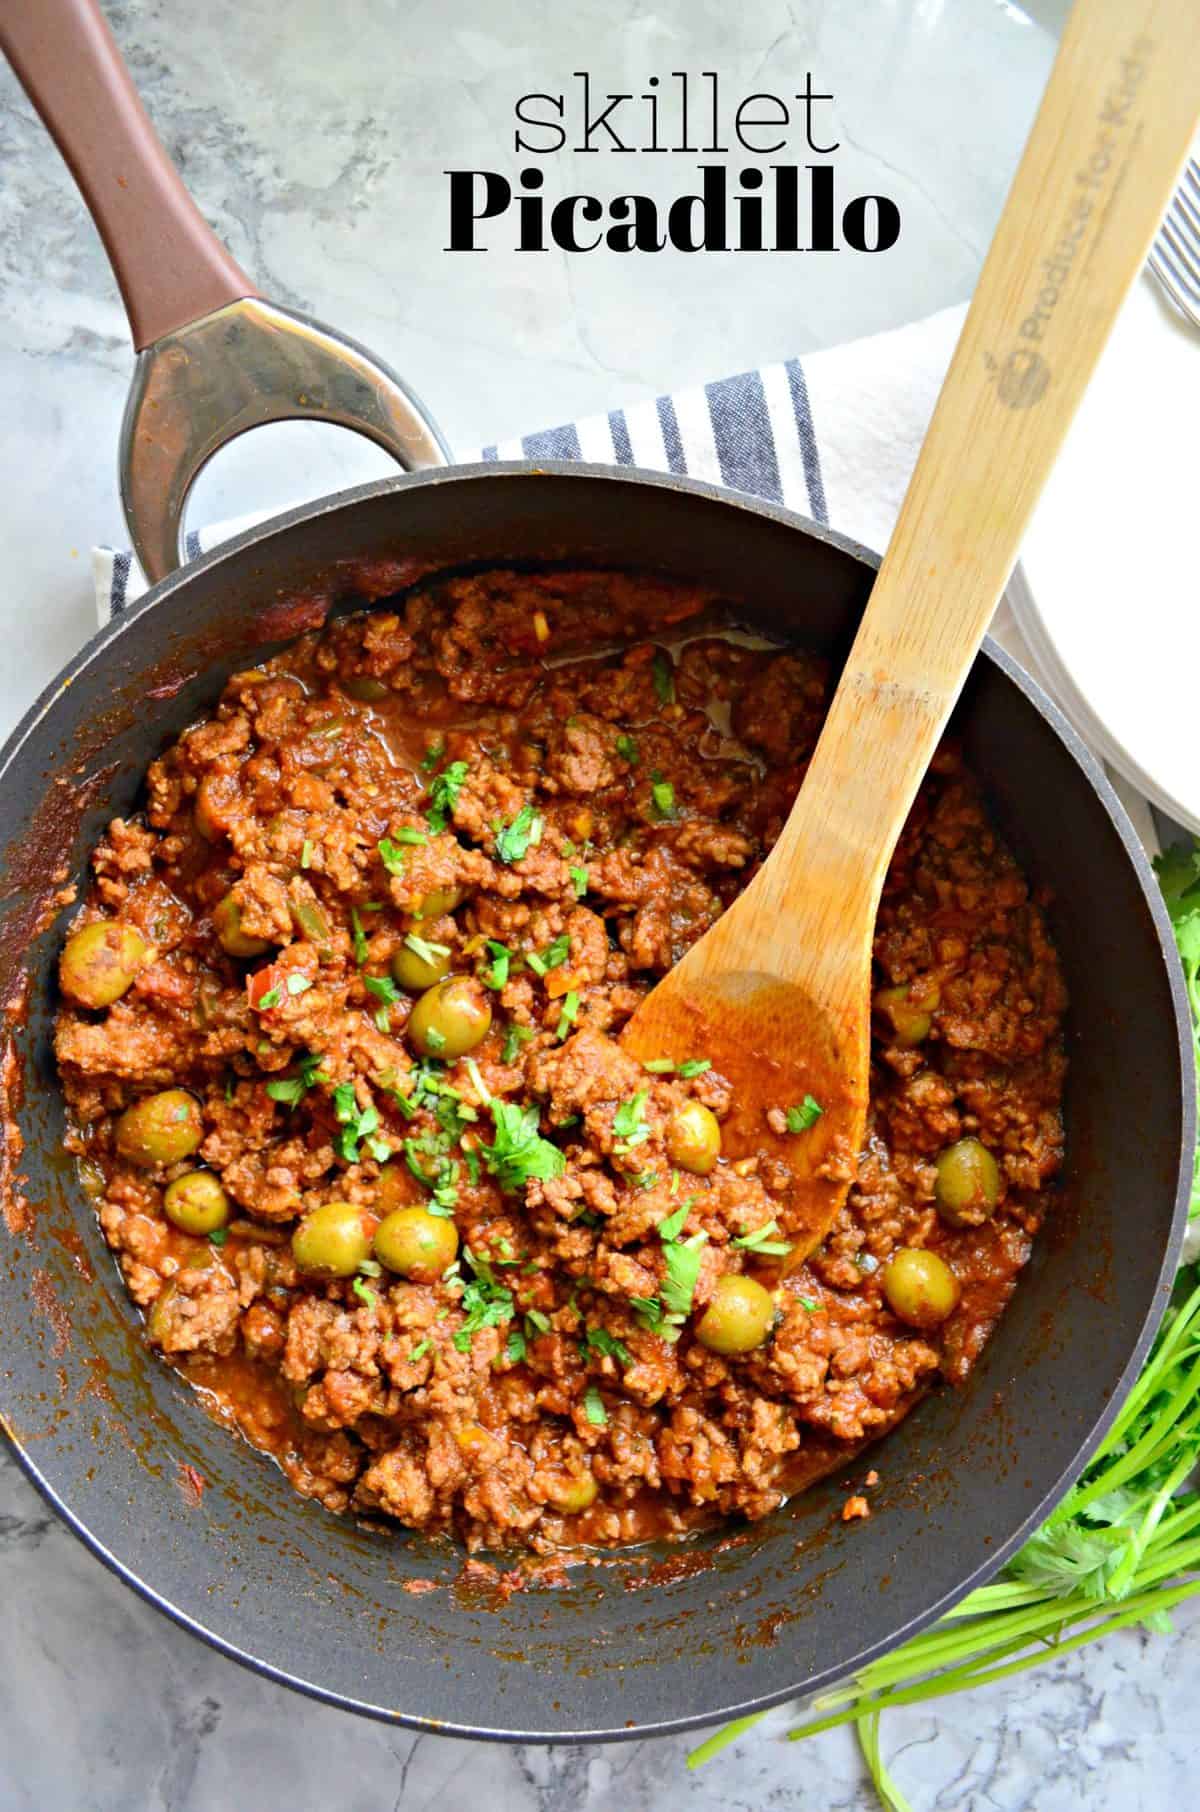 top view of ground meat, red sauce, green olives, and fresh herbs in a skillet with wooden spoon and title text.